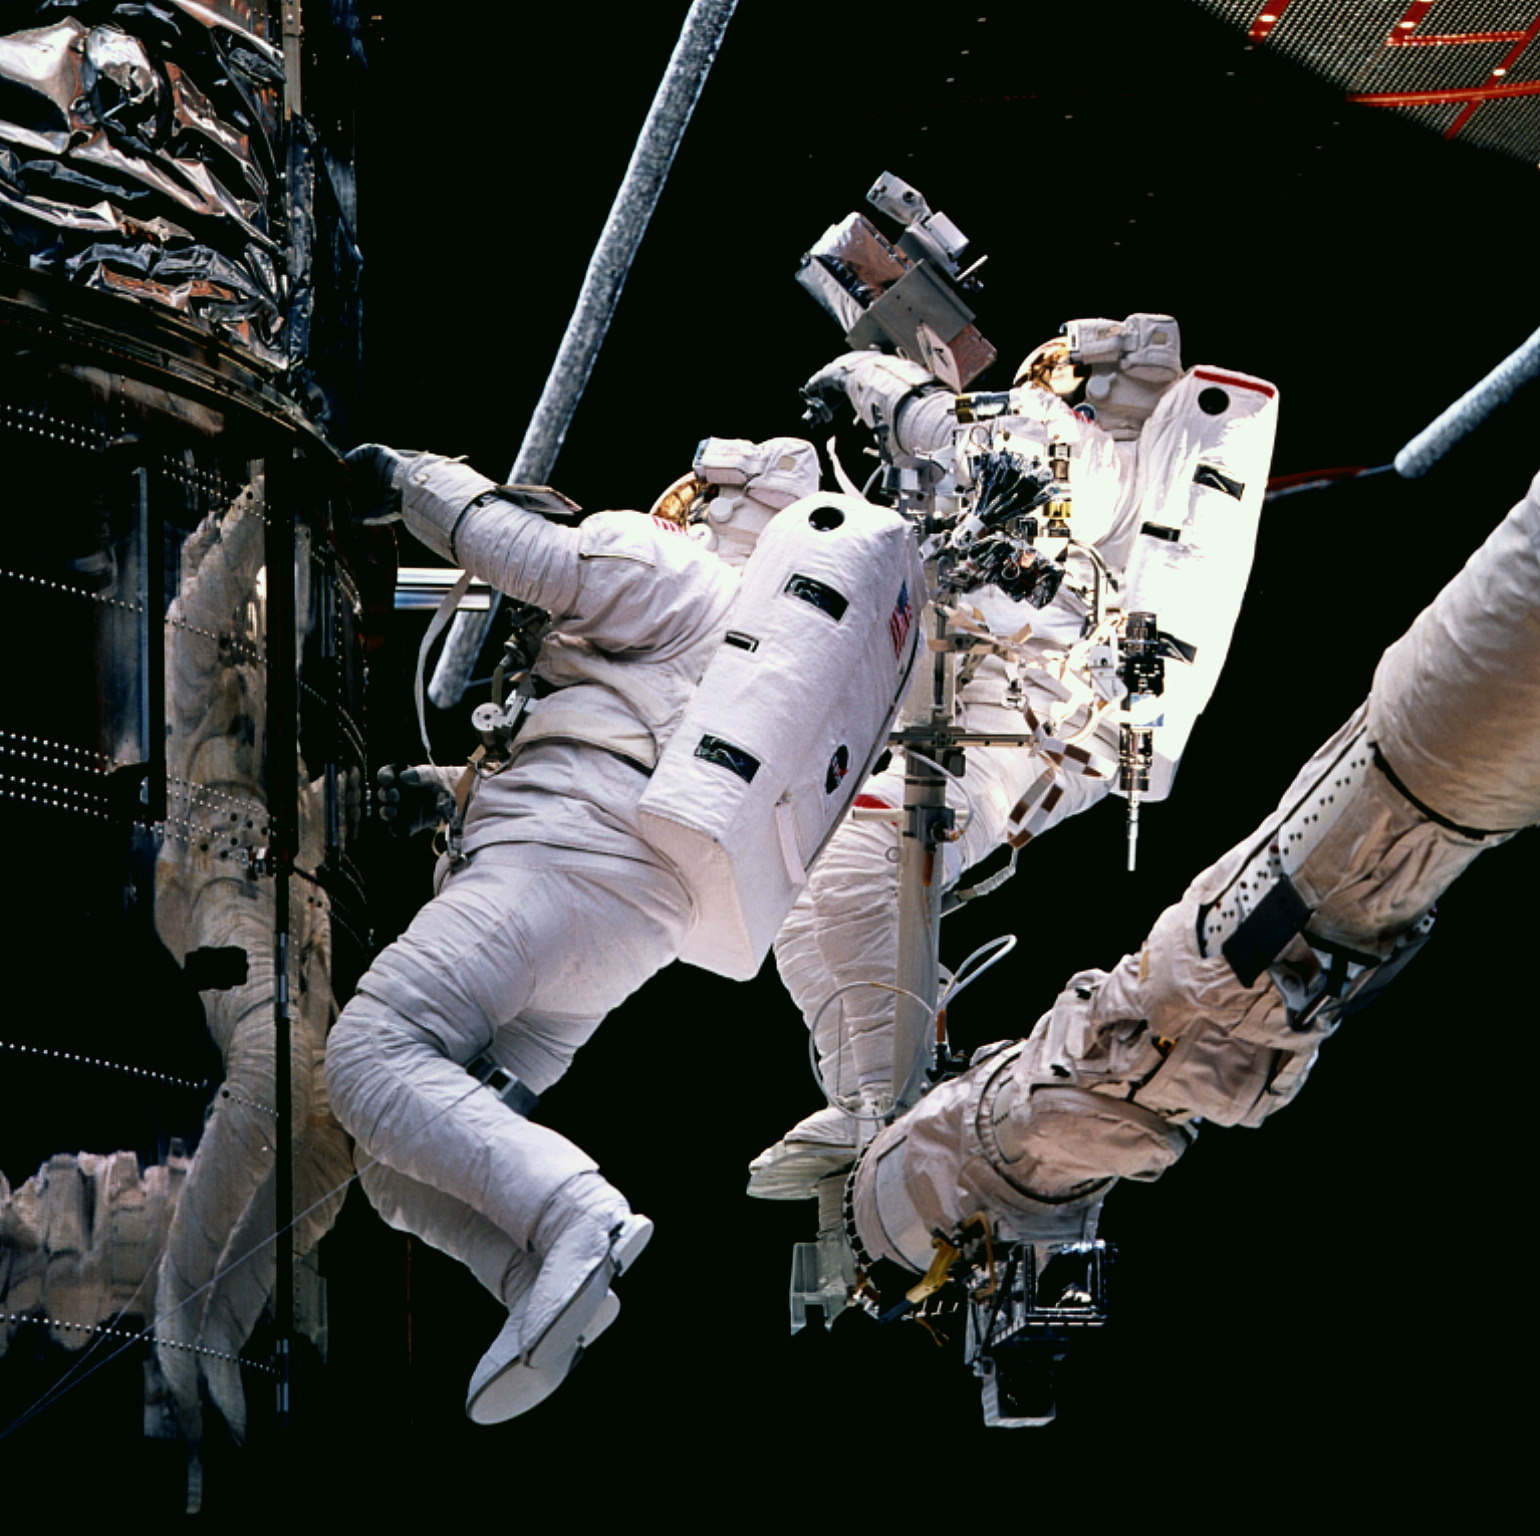 Two astronauts work on the Hubble telescope. One grips onto the telescope and the other is standing on the robotic arm.